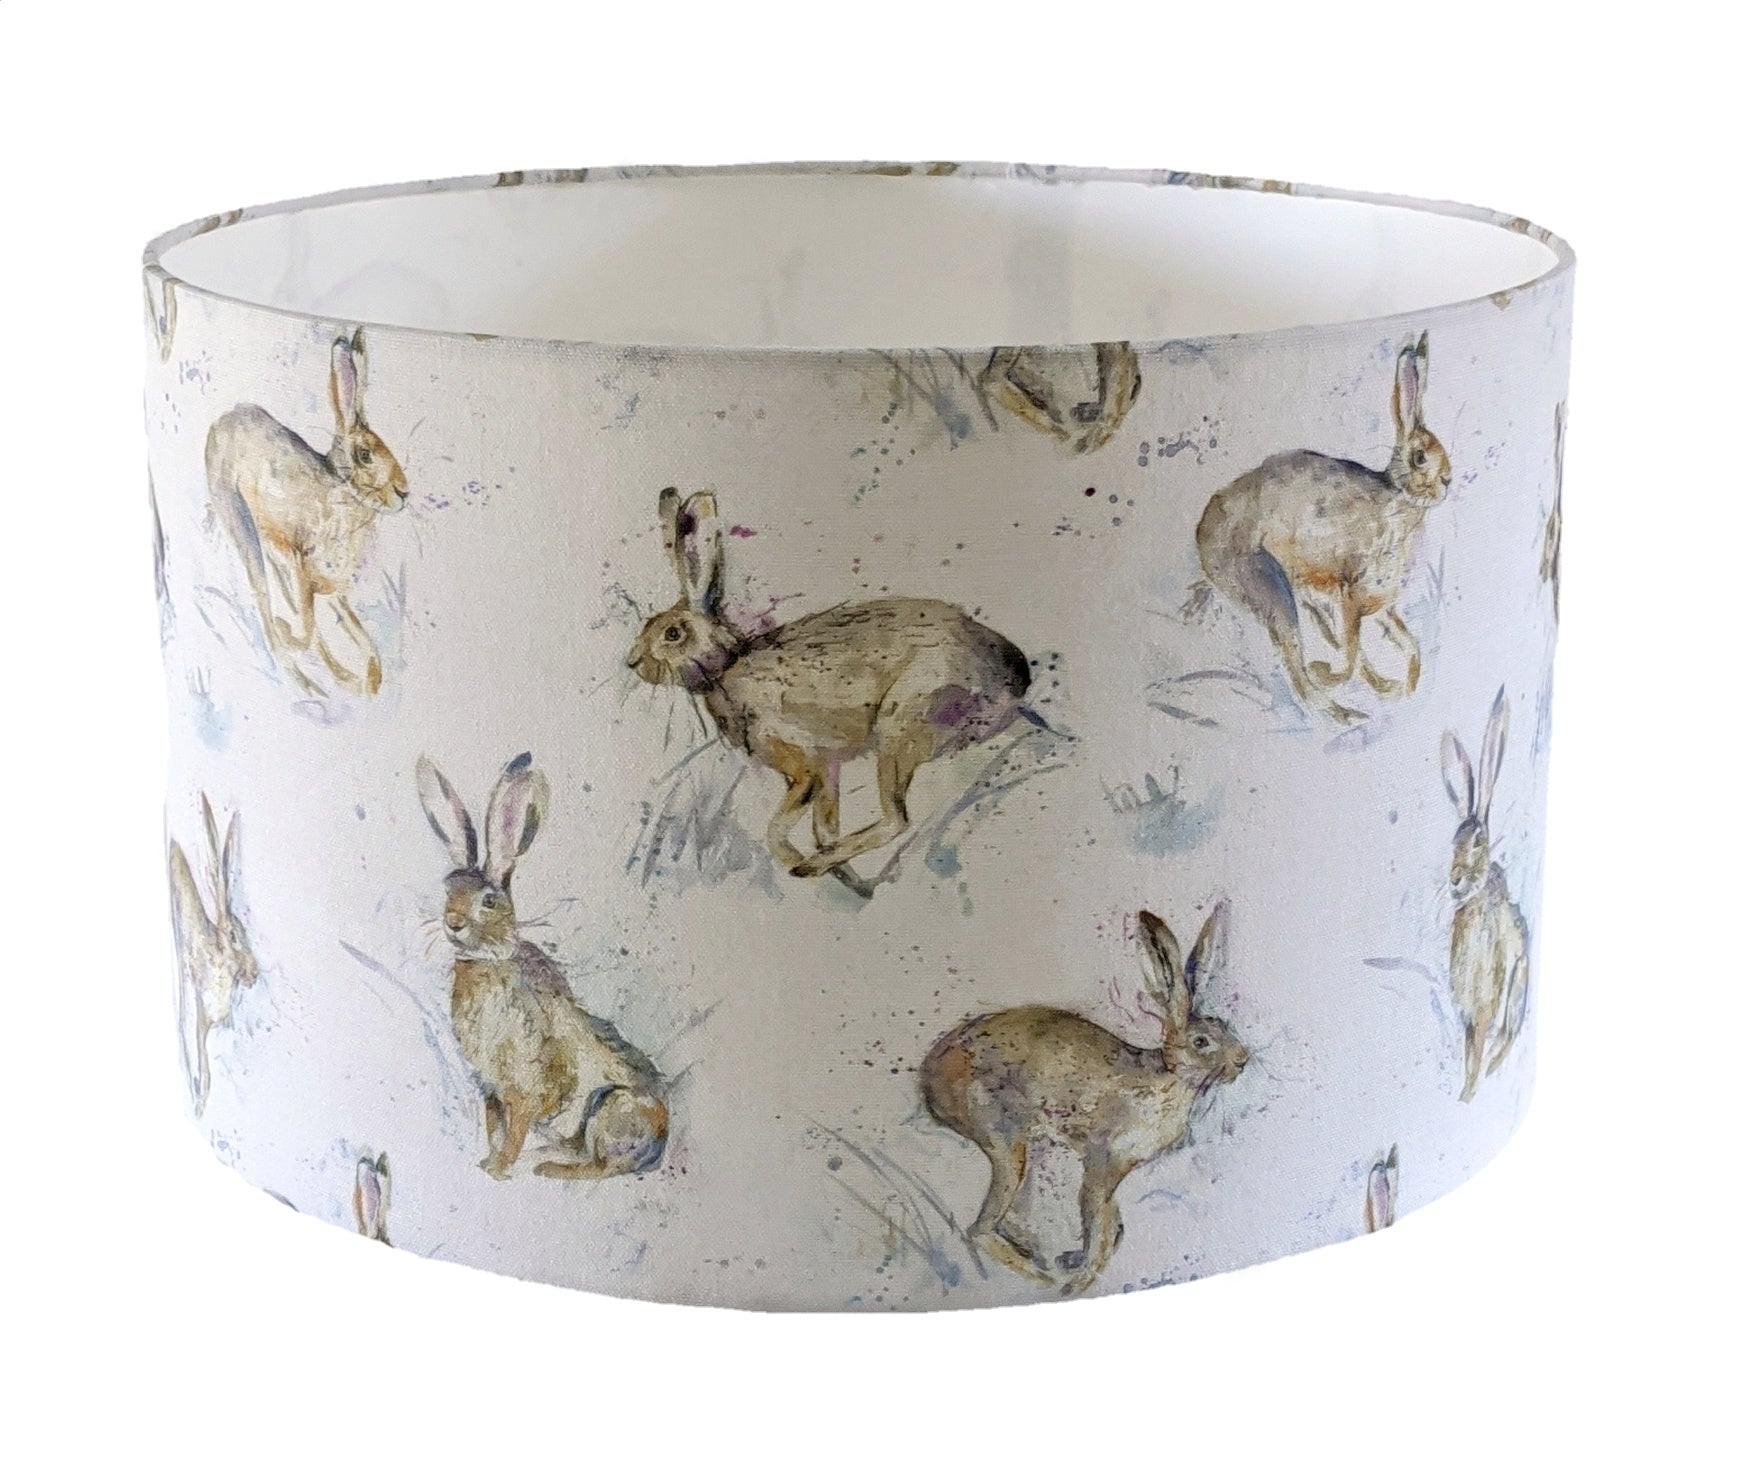 Voyage dashing hares for a lamp -  20cm, 30cm and 40cm